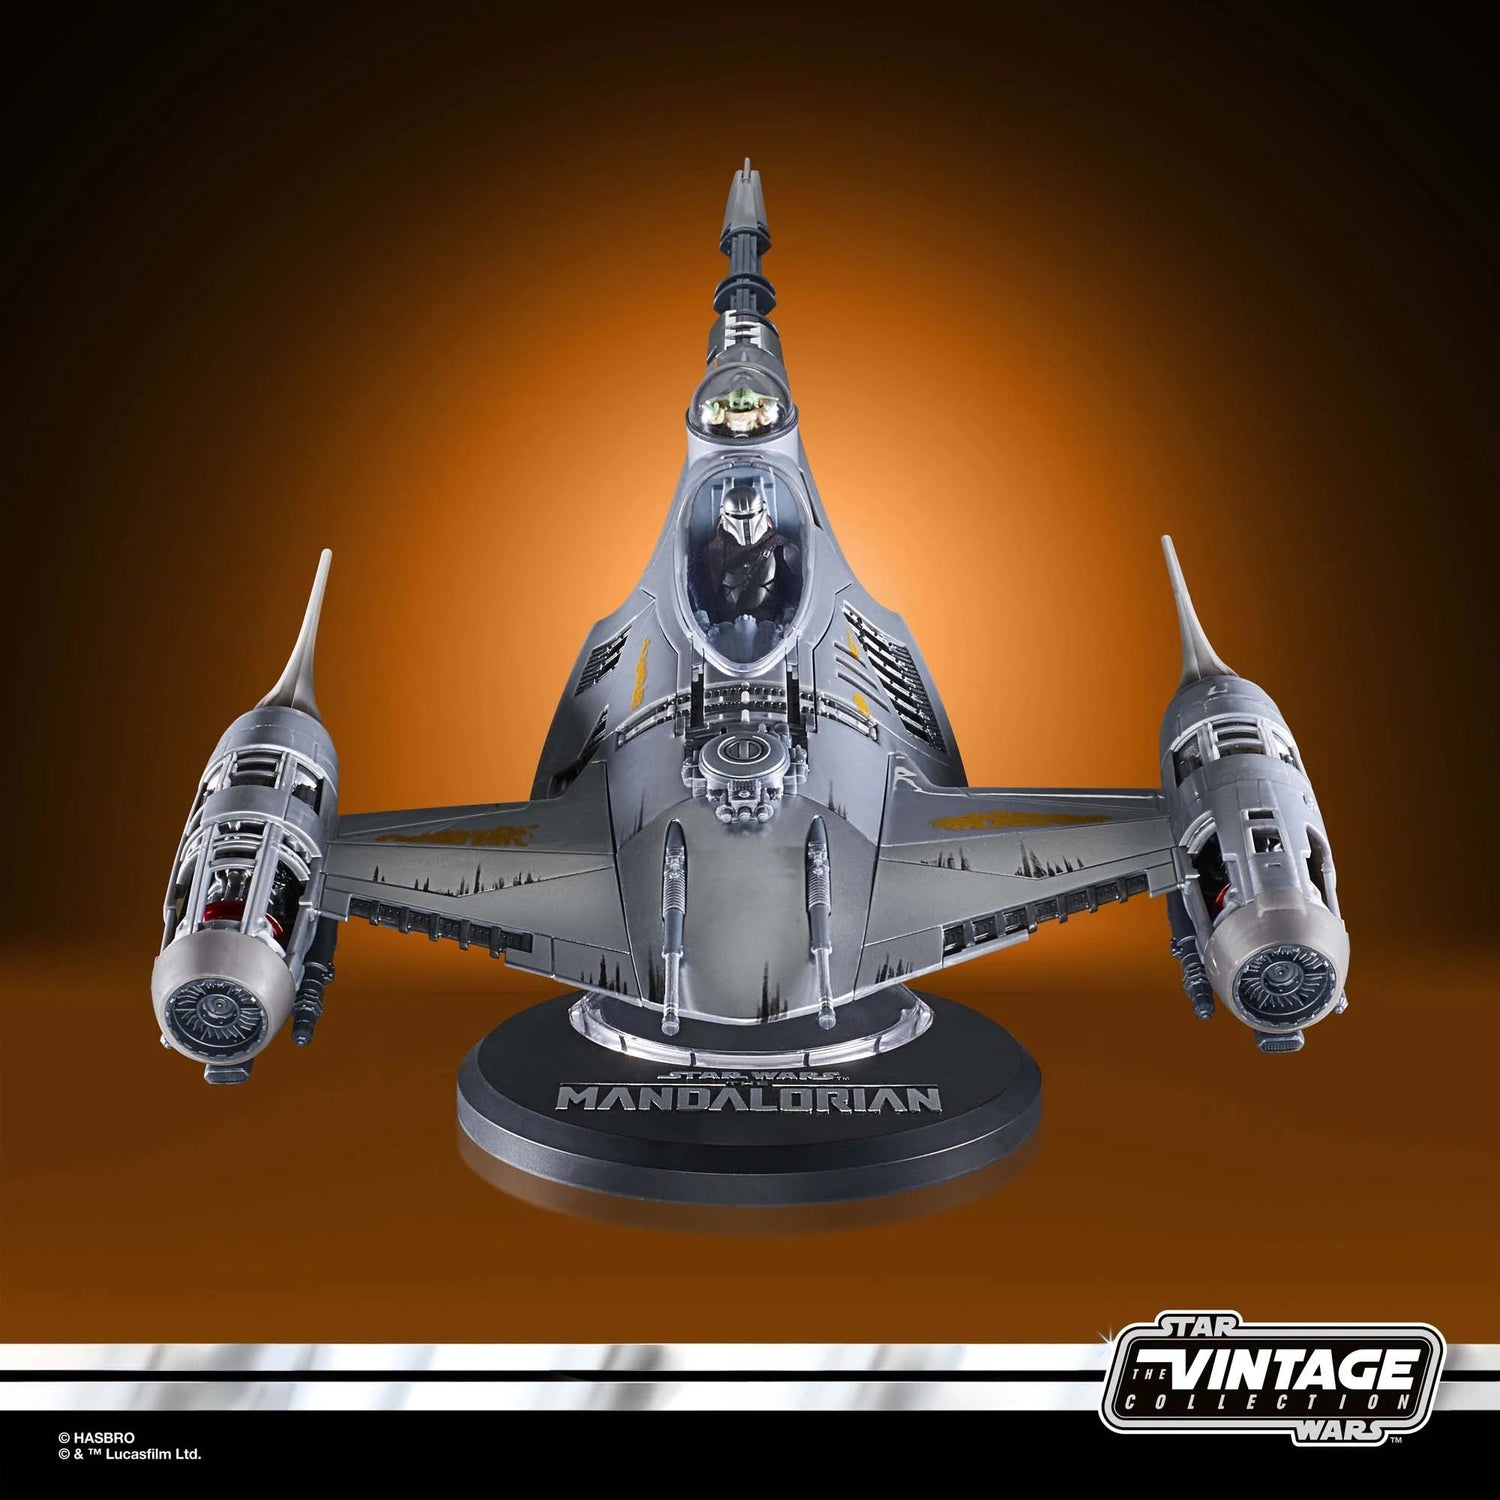 Star Wars: The Vintage Collection N-1 Starfighter Hasbro